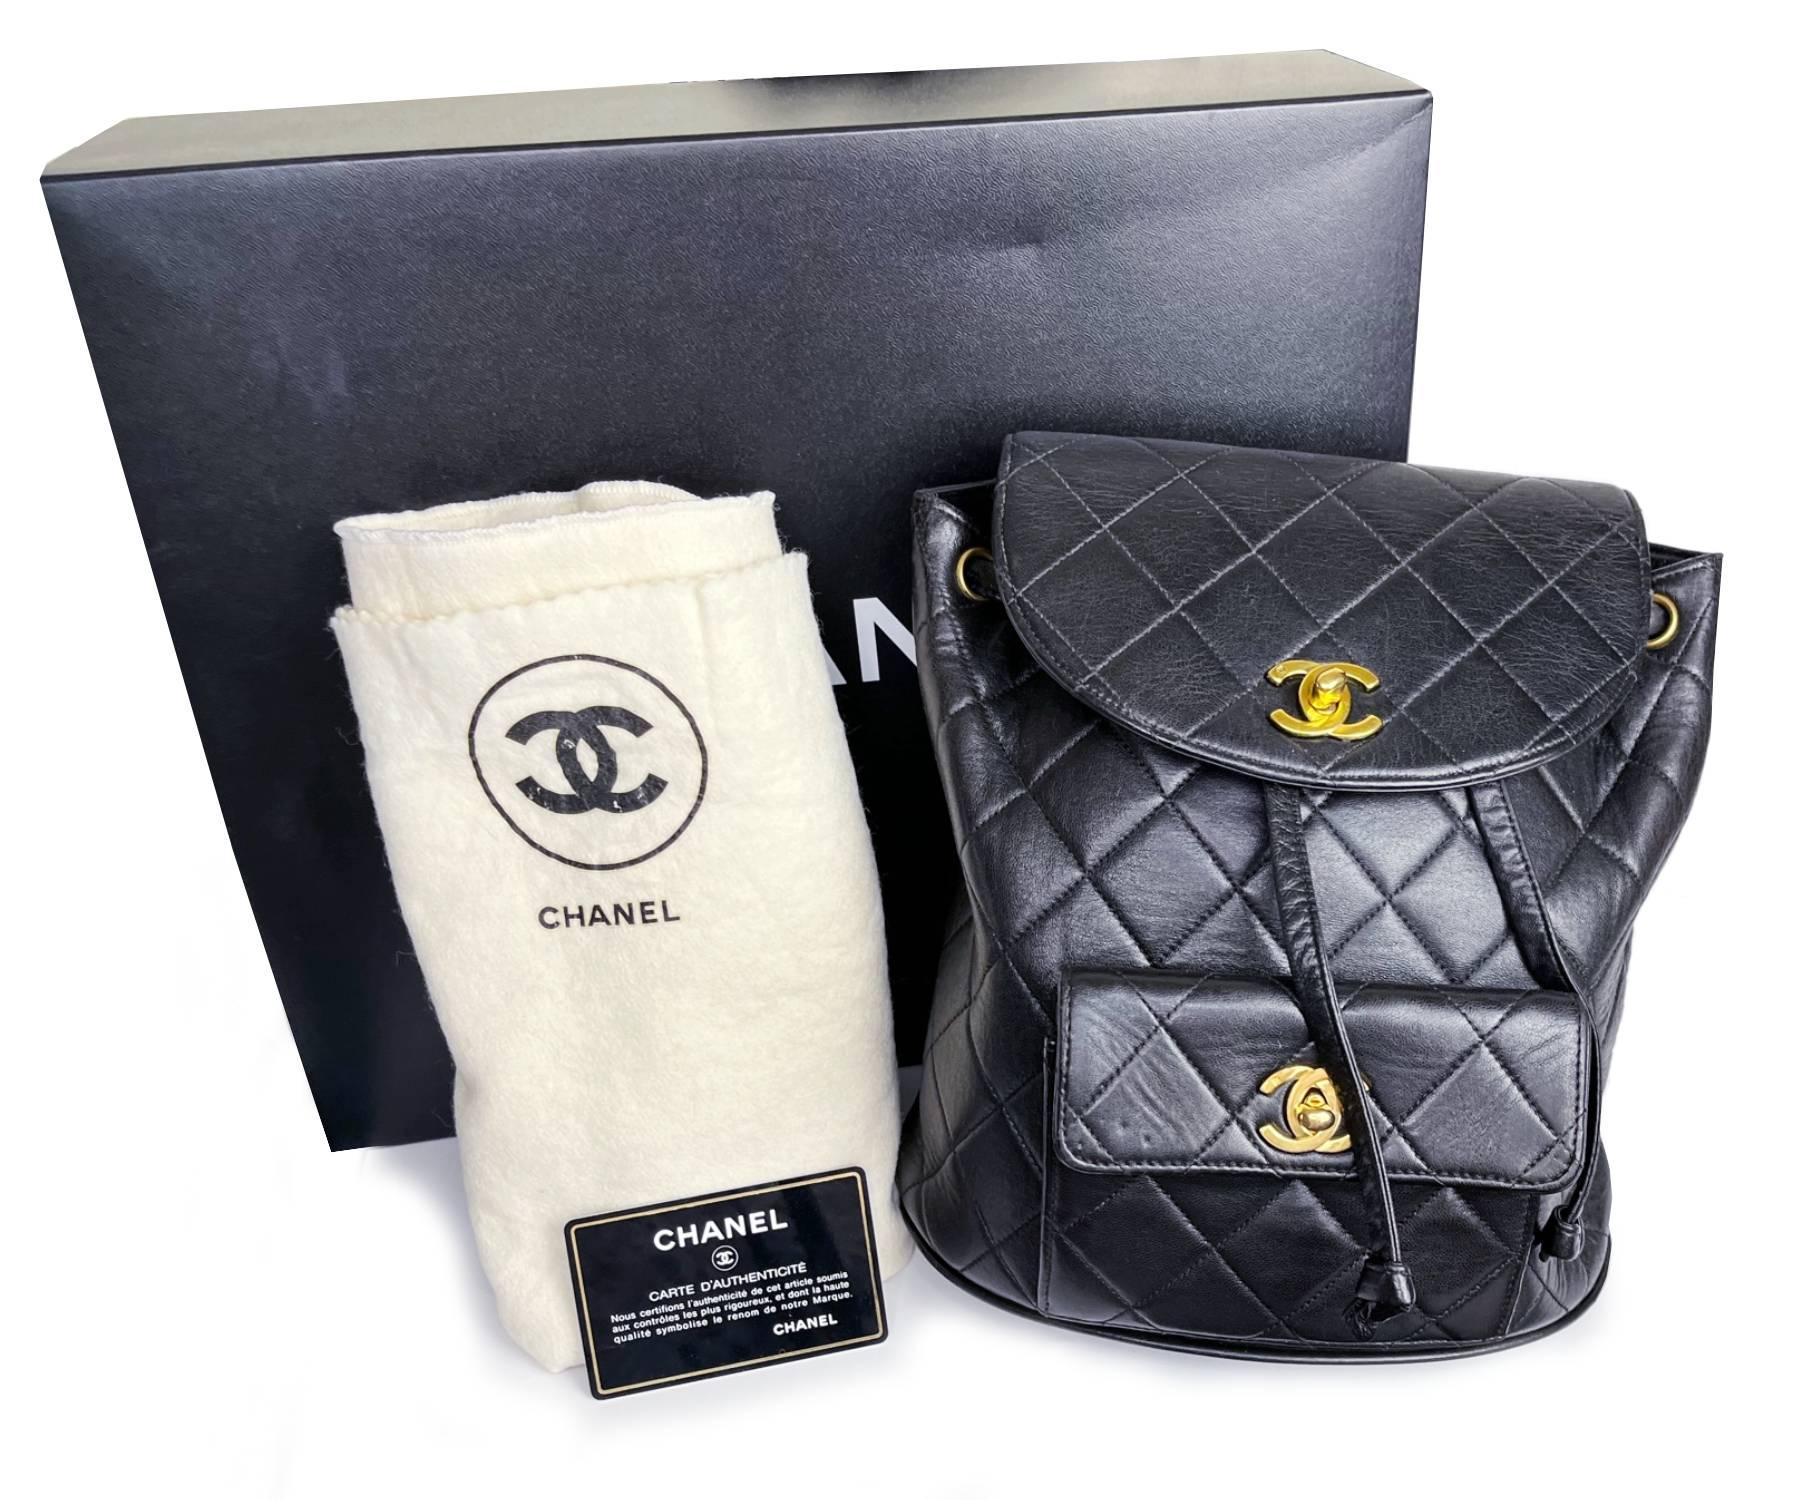 Chanel Vintage Classic Black Double CC Turnlock Backpack Bag

* Damaged Serial Sticker Attached
* Made in France
* Gold plated CC hardware
* Comes with the original box, dustbag, booklet and control number card
* As seen on Miroslava Duma and Ariana